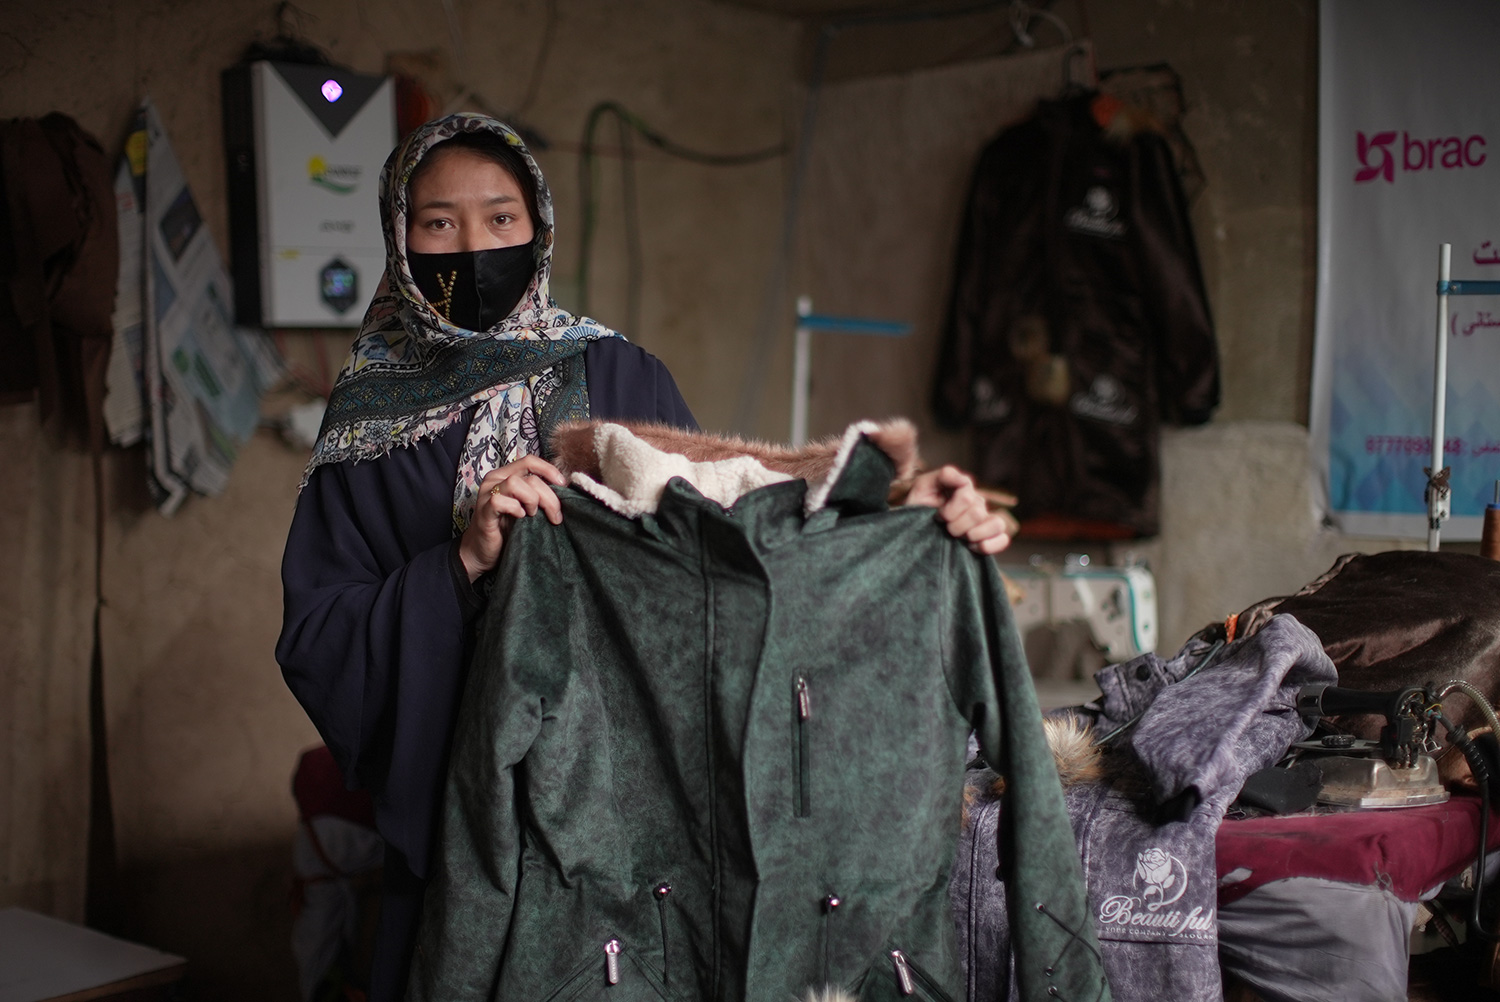 Zainab, a tailor in Afghanistan, proudly holds up a finished coat she made.